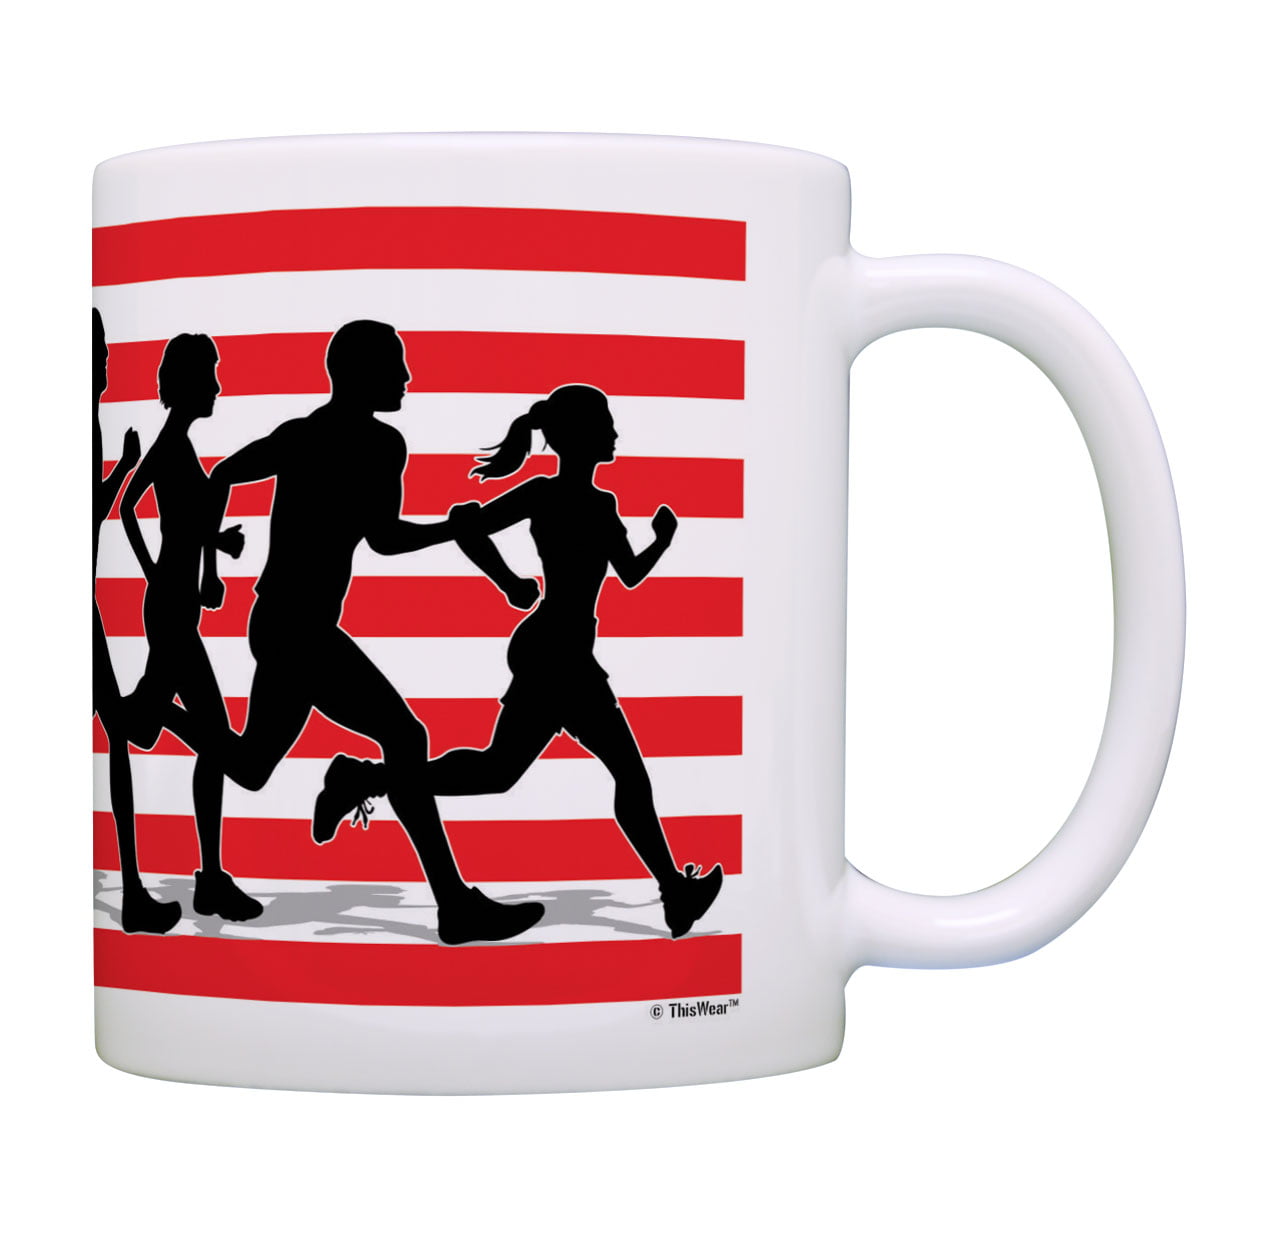 Funny Cute Gift Printed both sides for Left or Right hands Made in the USA itsaskin1 11oz Awesome I Work Hard so my Dog can Have a Better Life Coffee Cup Mug 